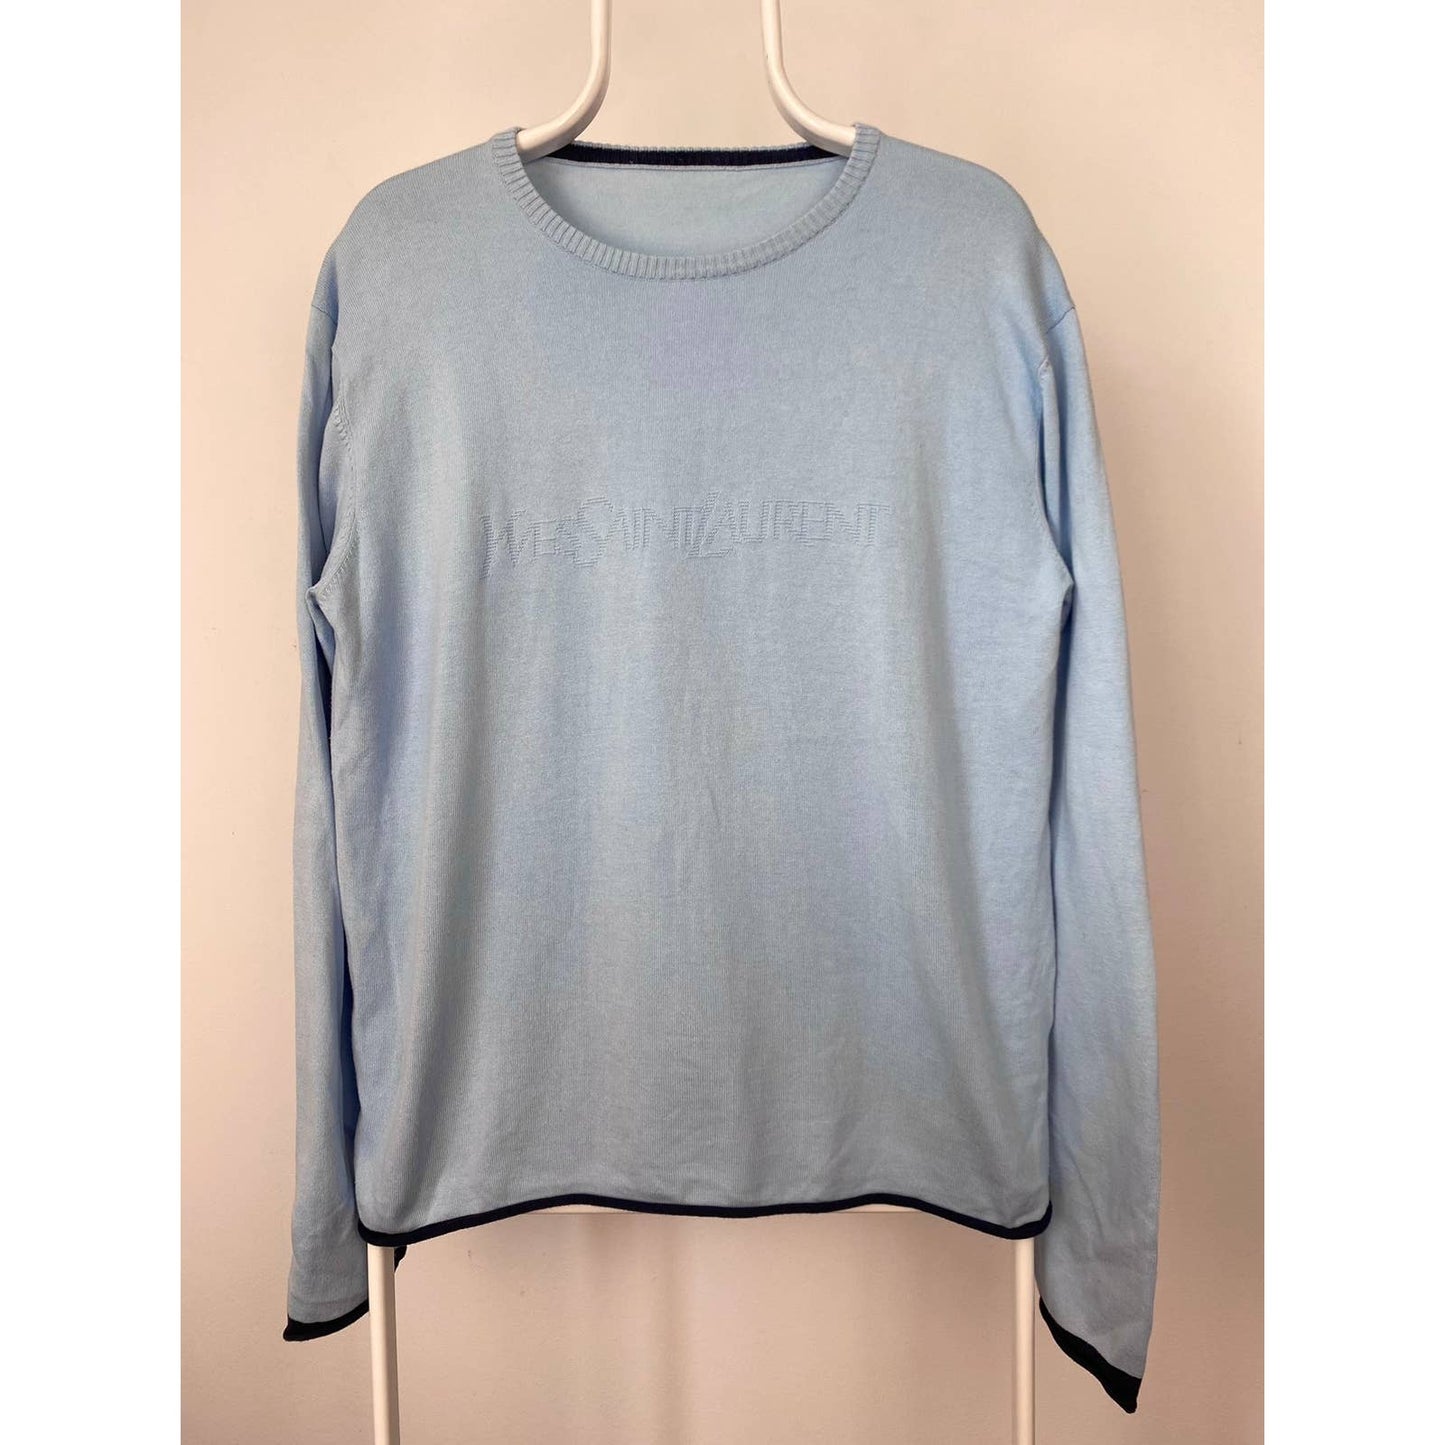 Yves Saint Laurent Vintage baby blue spell out sweater YSL